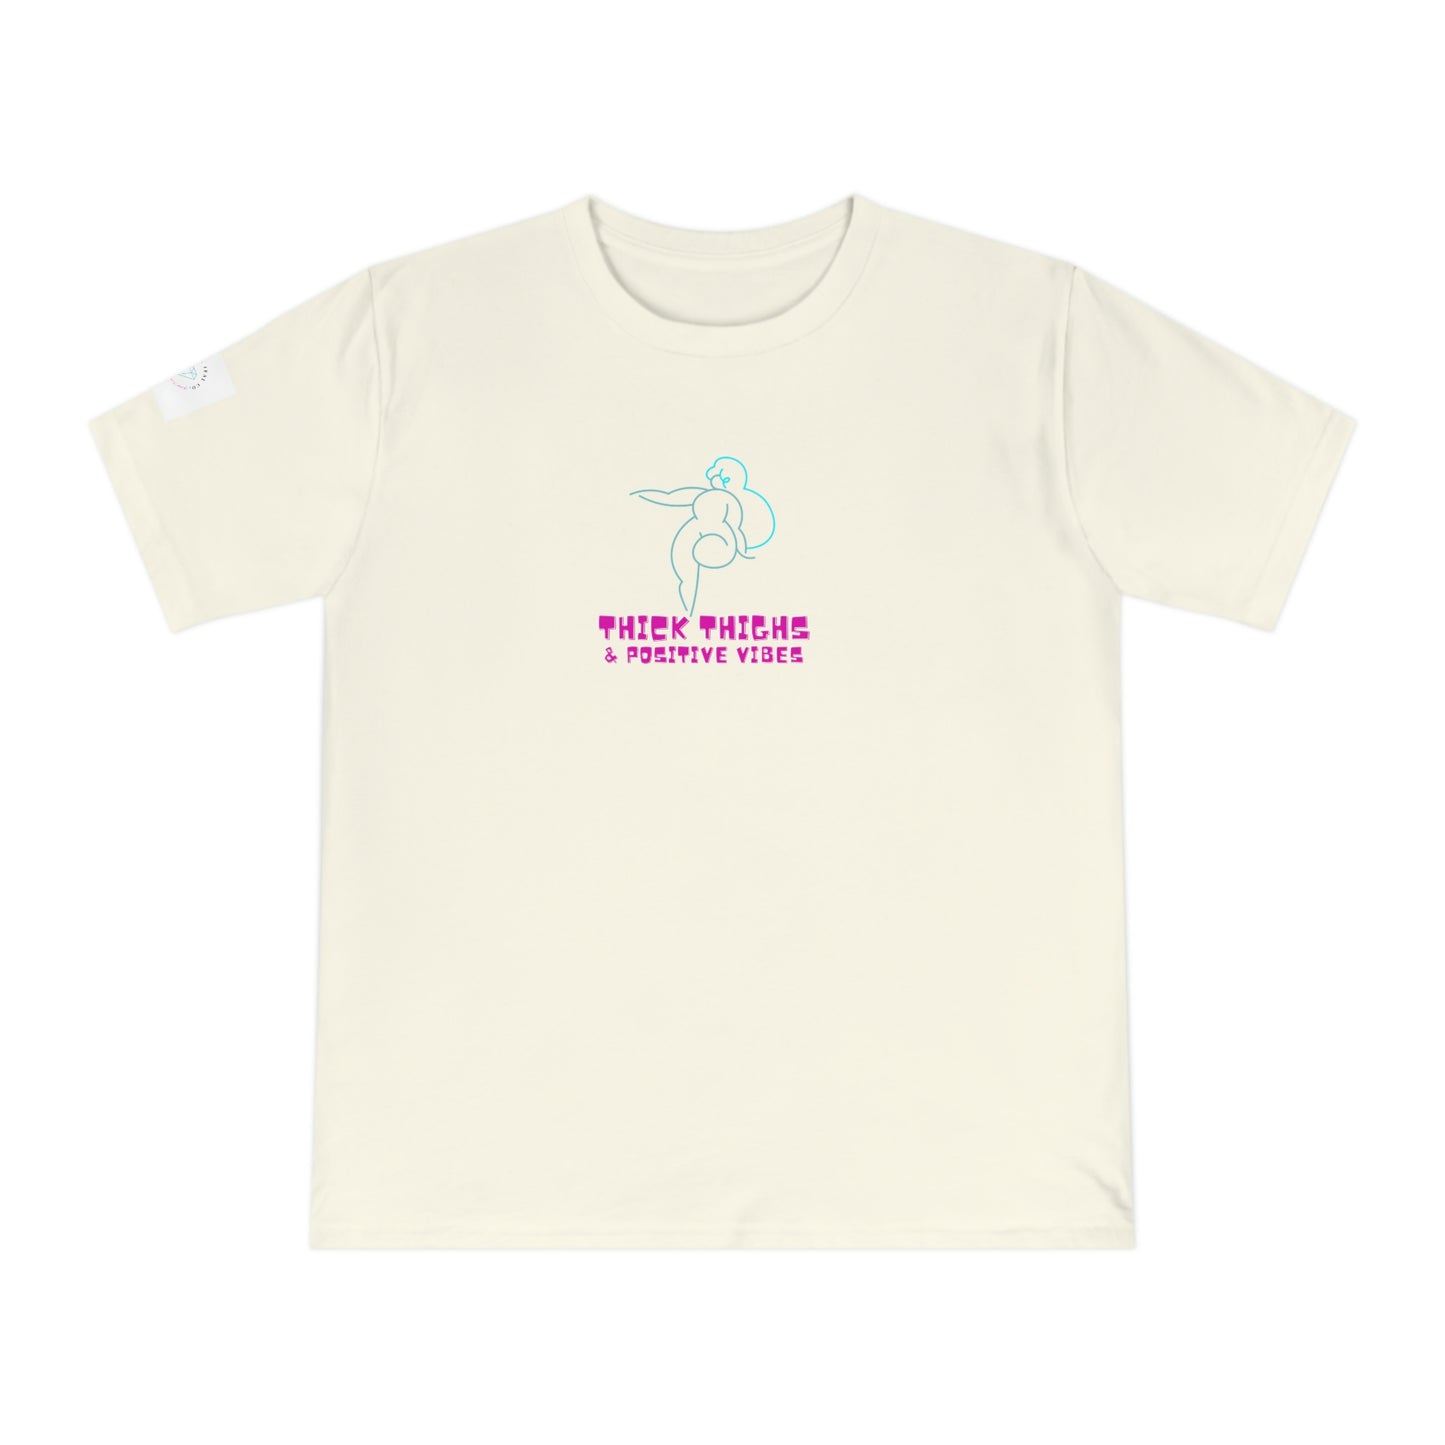 Thick Thighs & Positive Vibes T-shirt